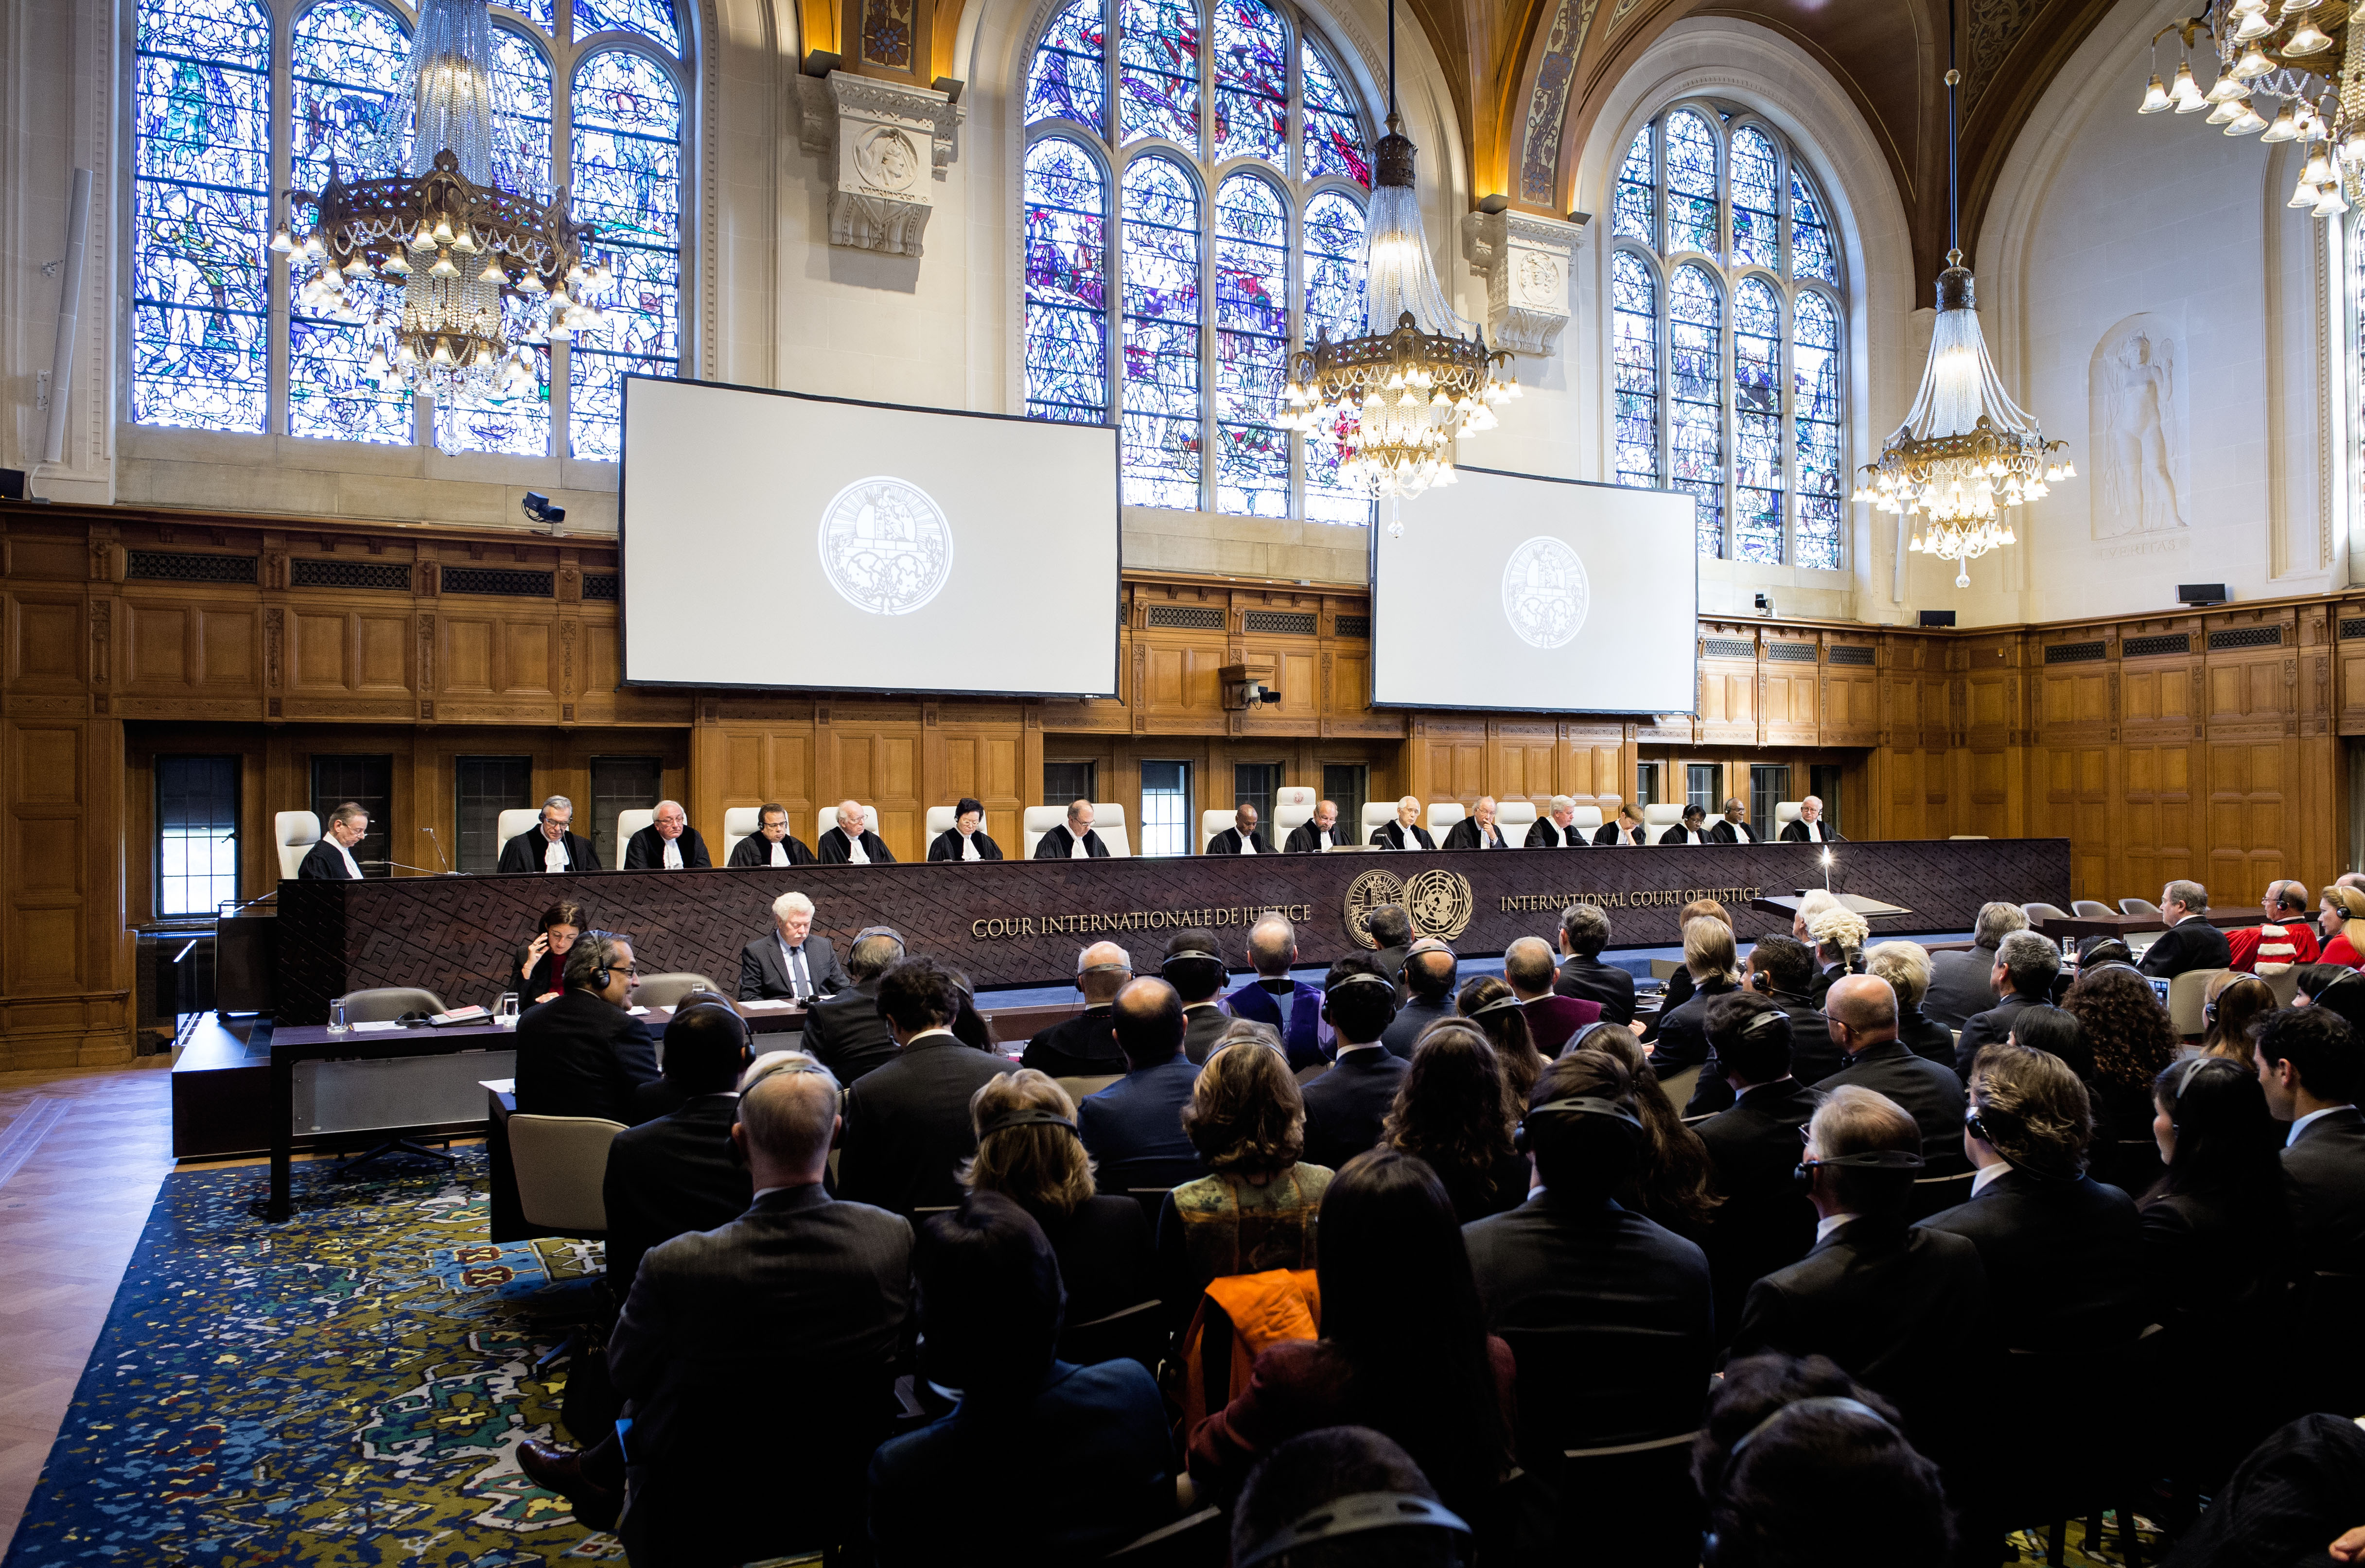 View of the ICJ courtroom on the opening day.